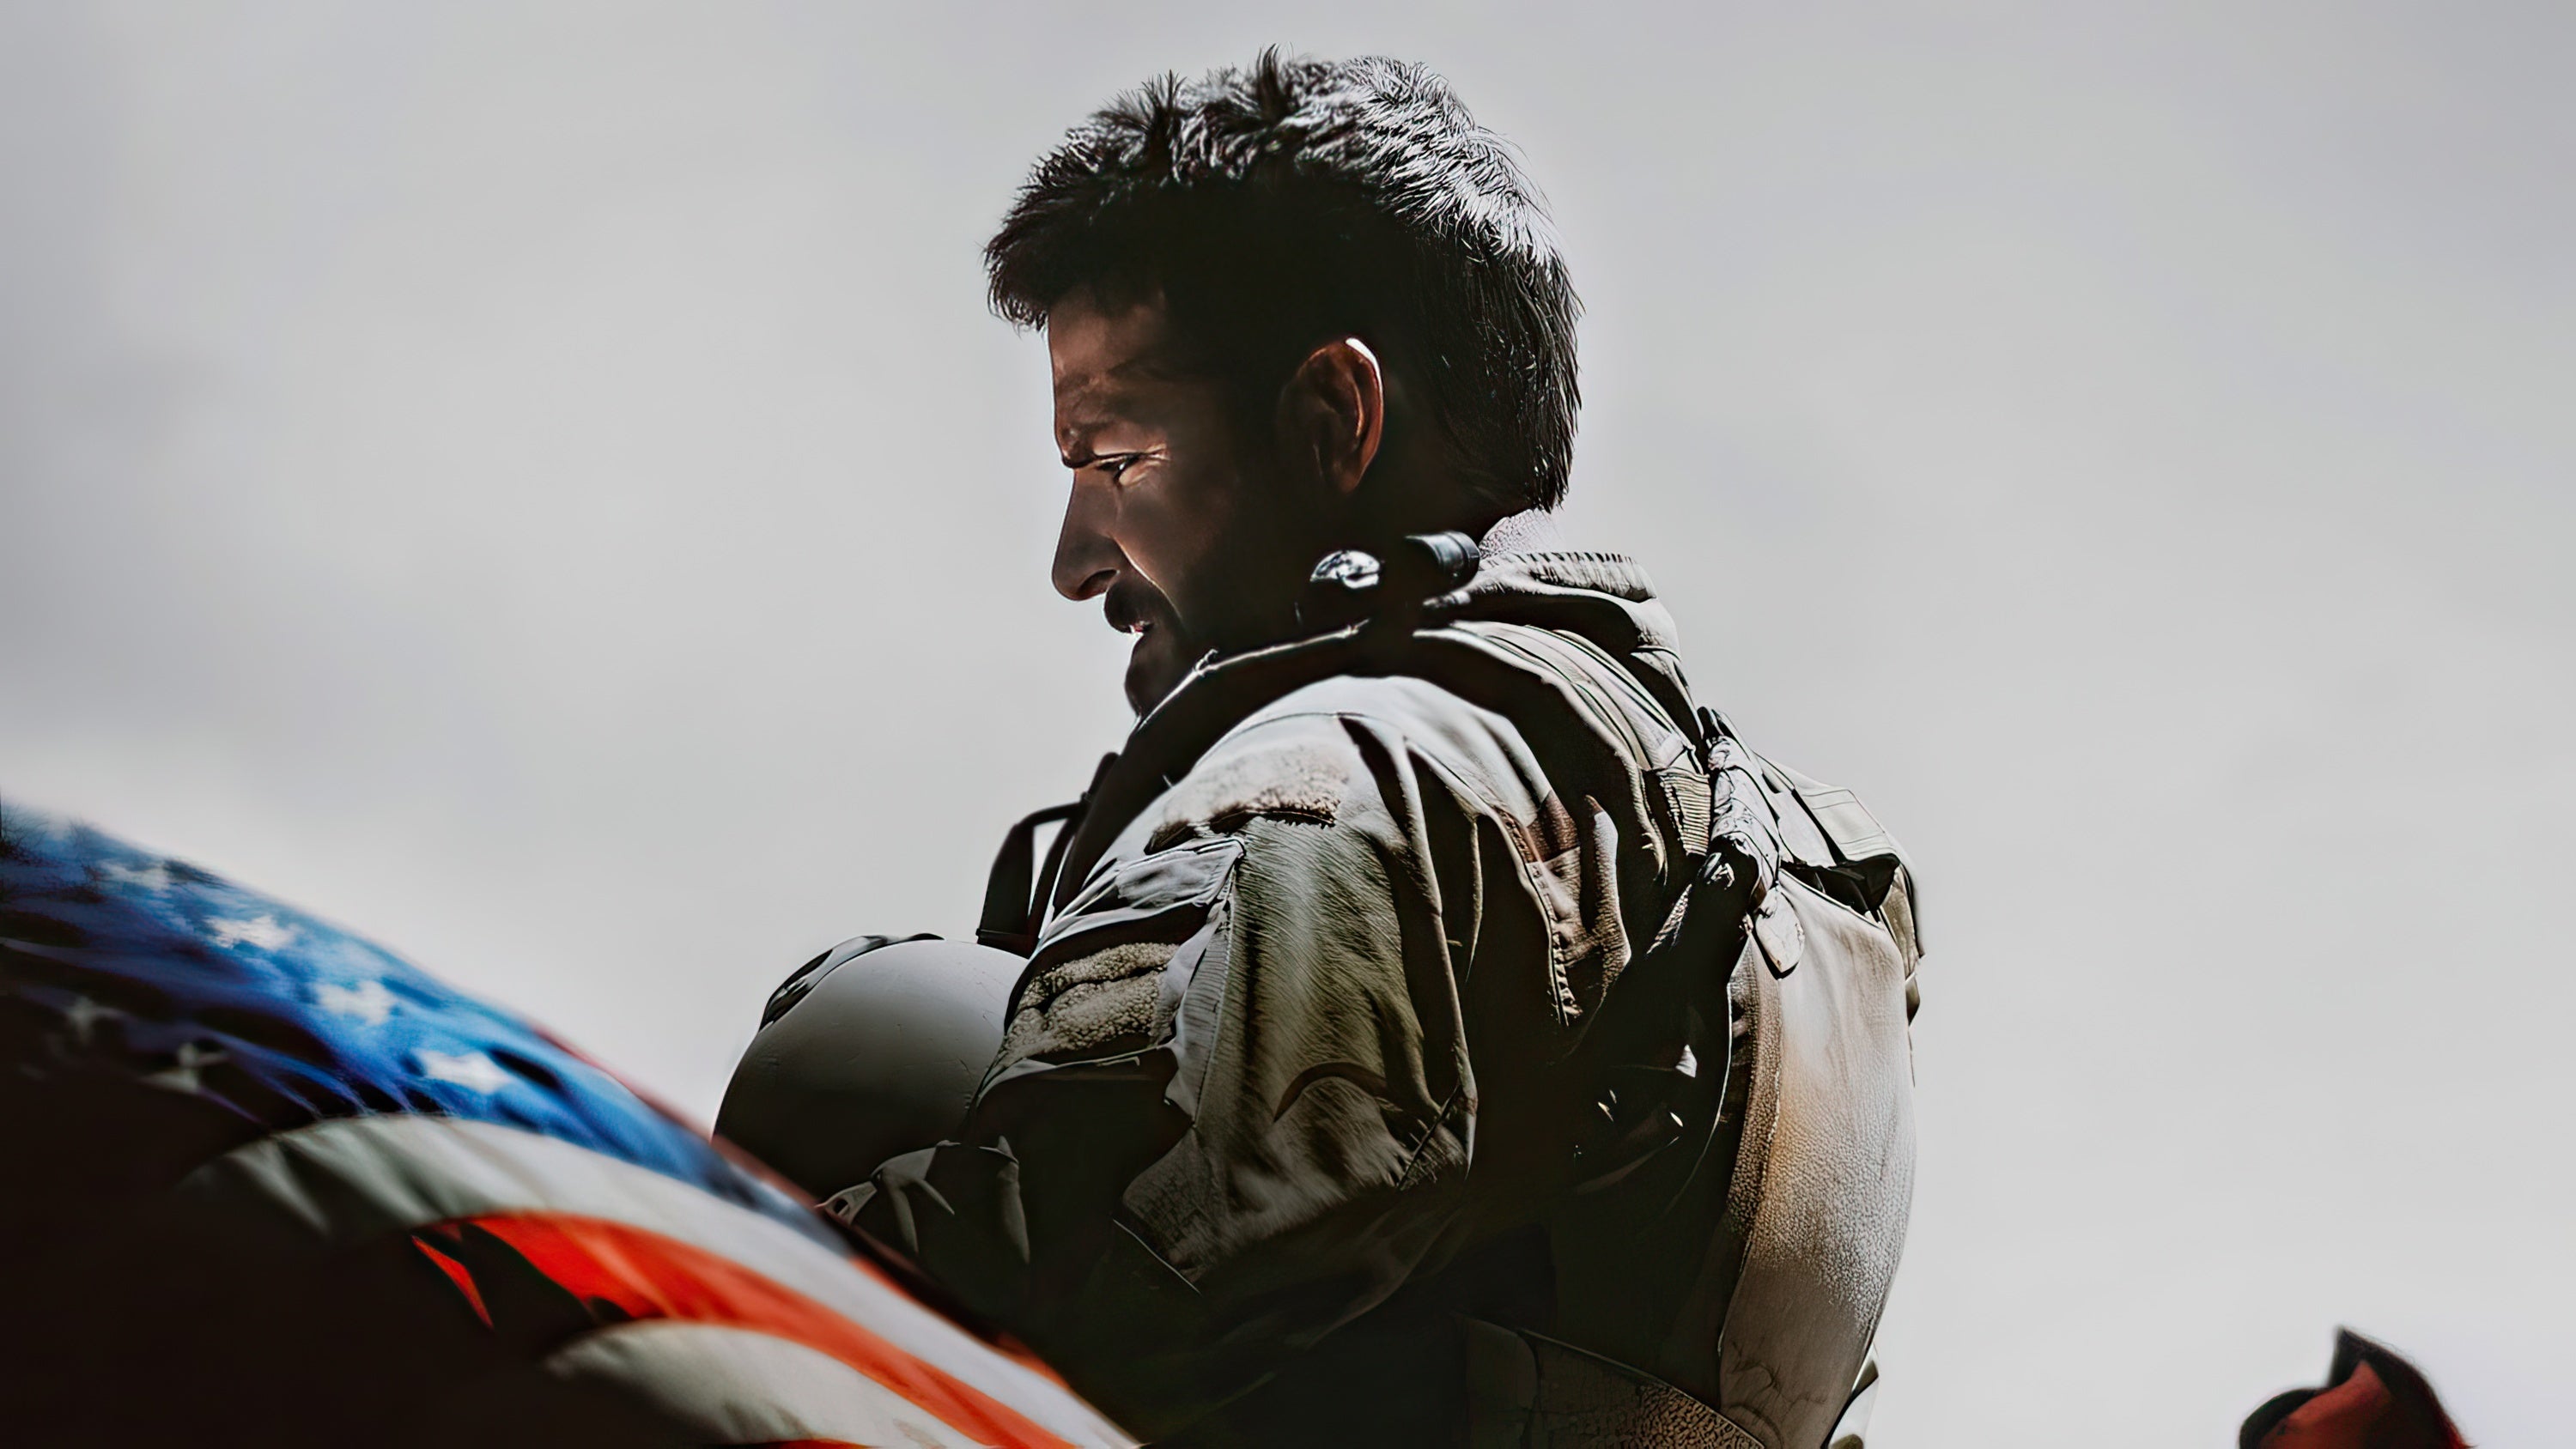 American Sniper: The Autobiography of the Most Lethal Sniper in U.S. History - Book Review - Image from Movie